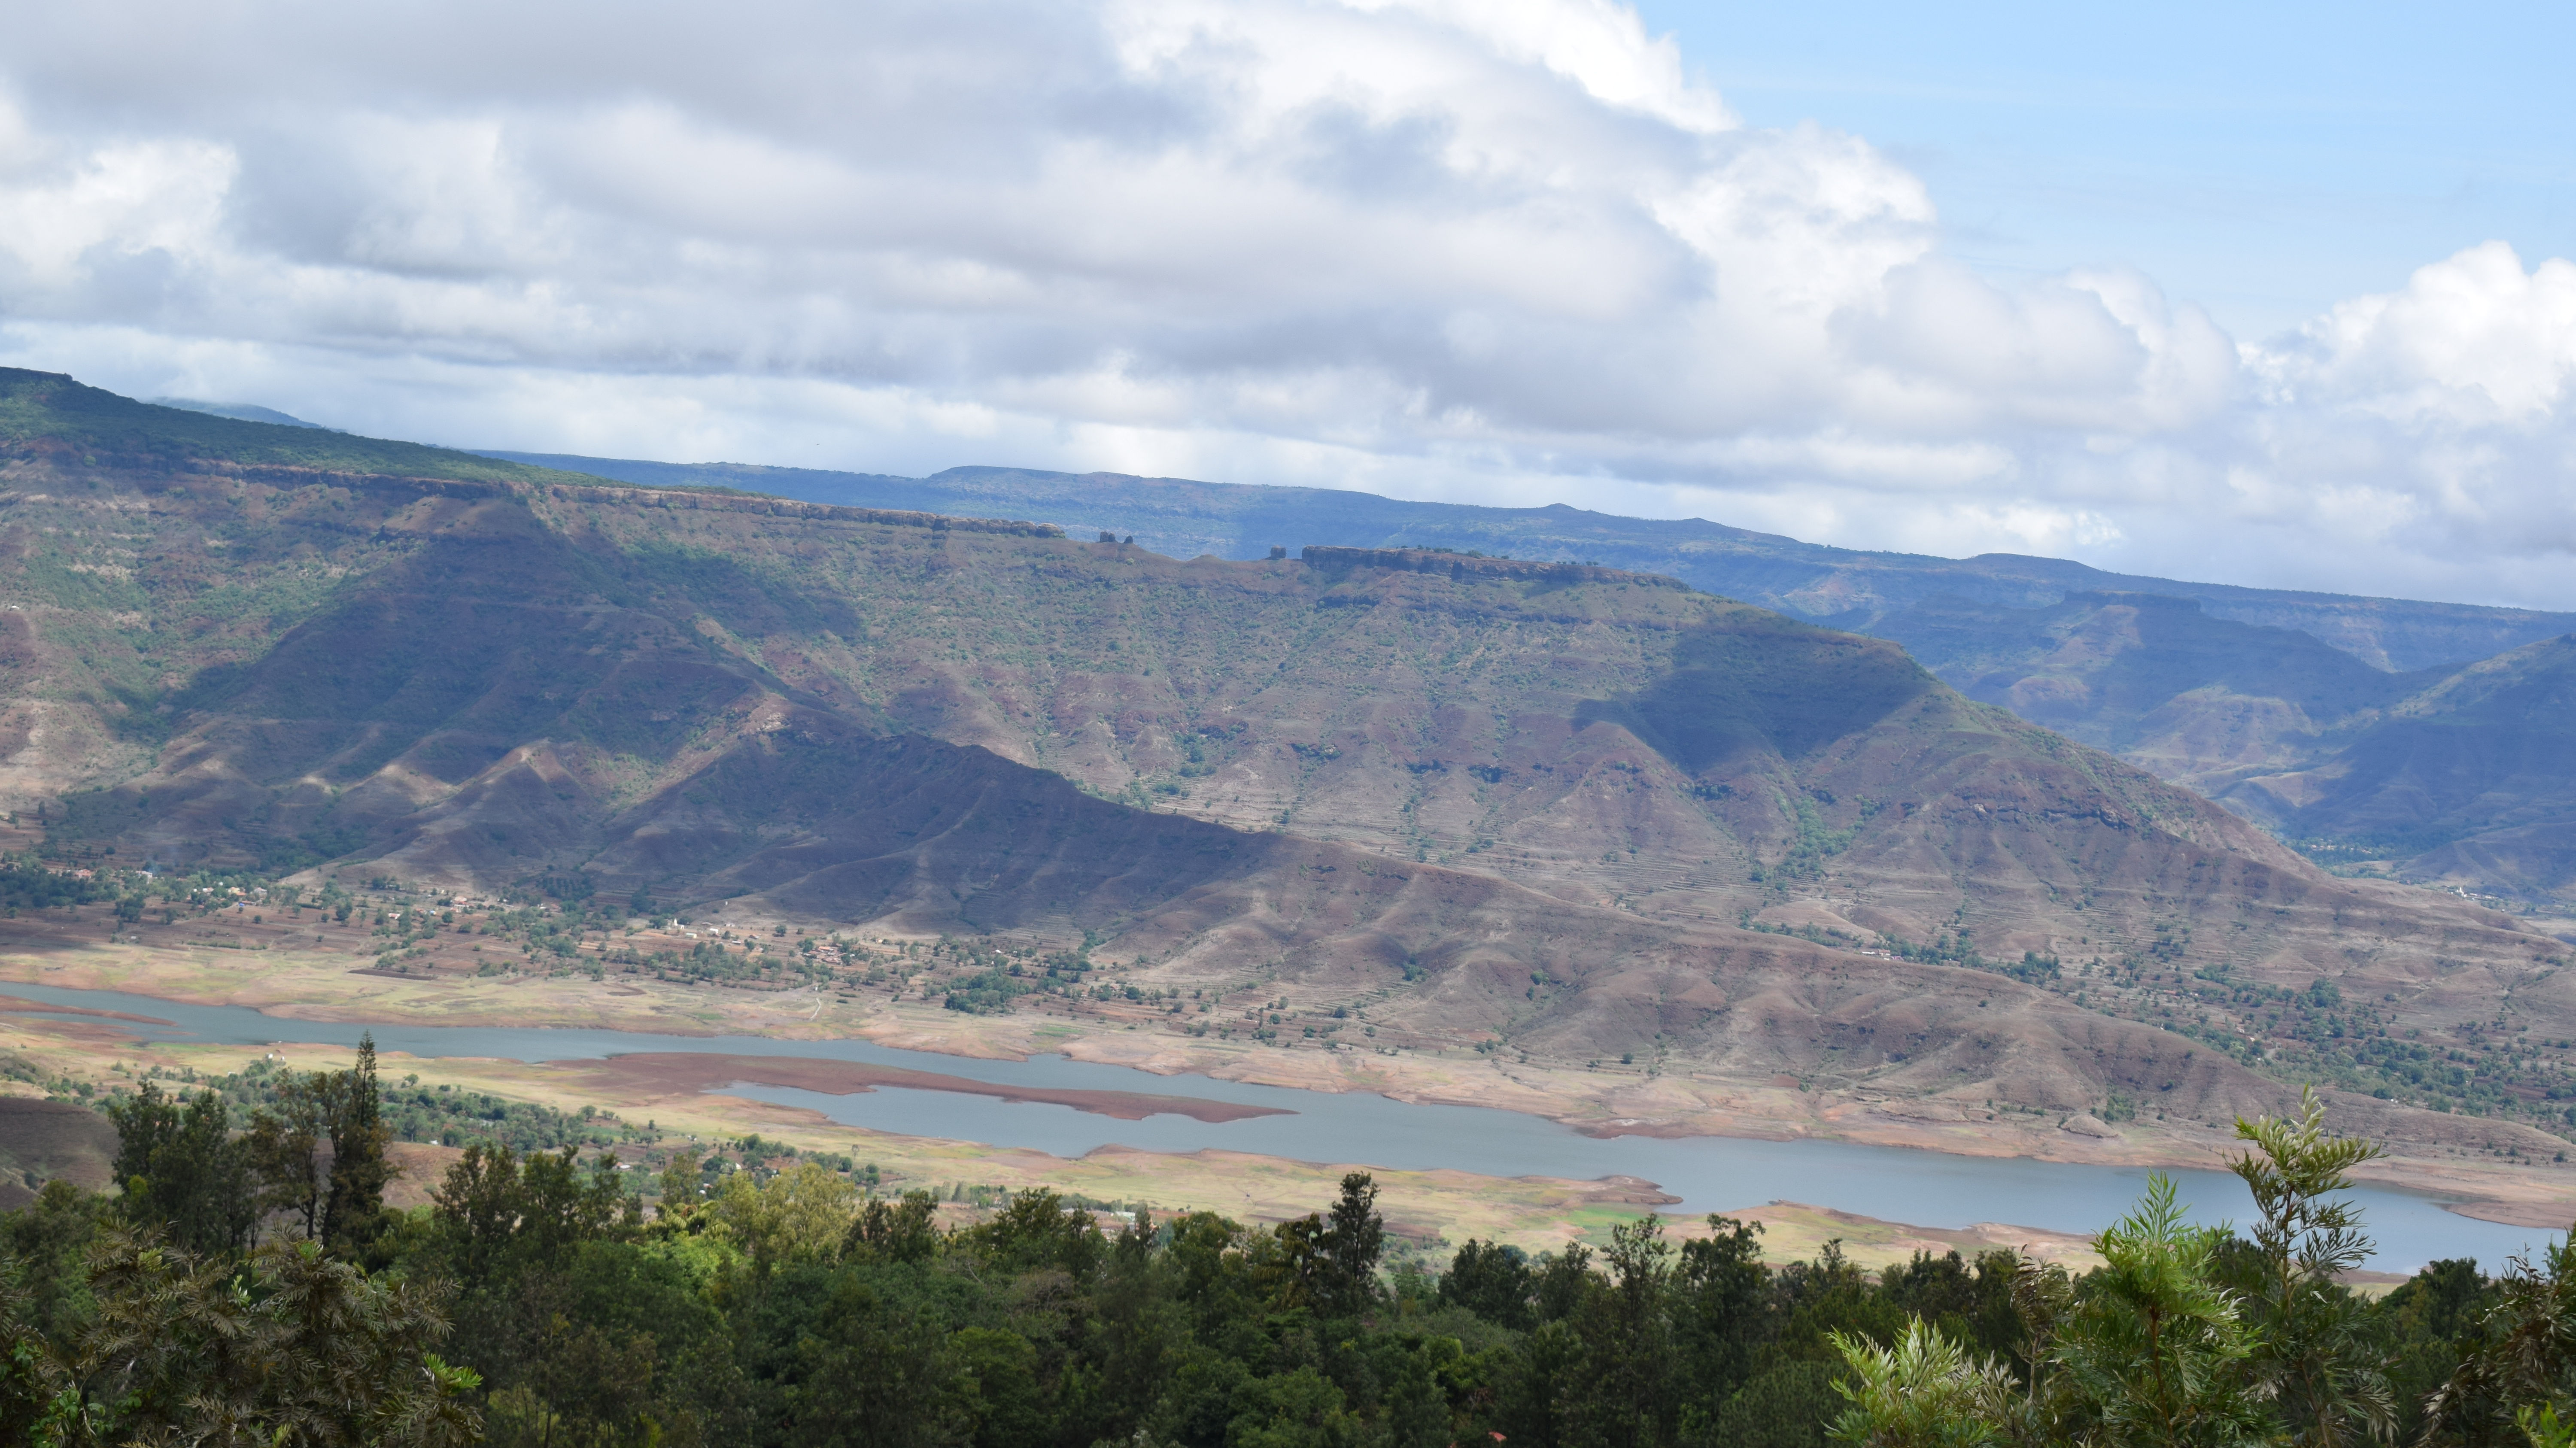 Mahabaleshwar is a perfect weekend getaway when visiting hill stations in India